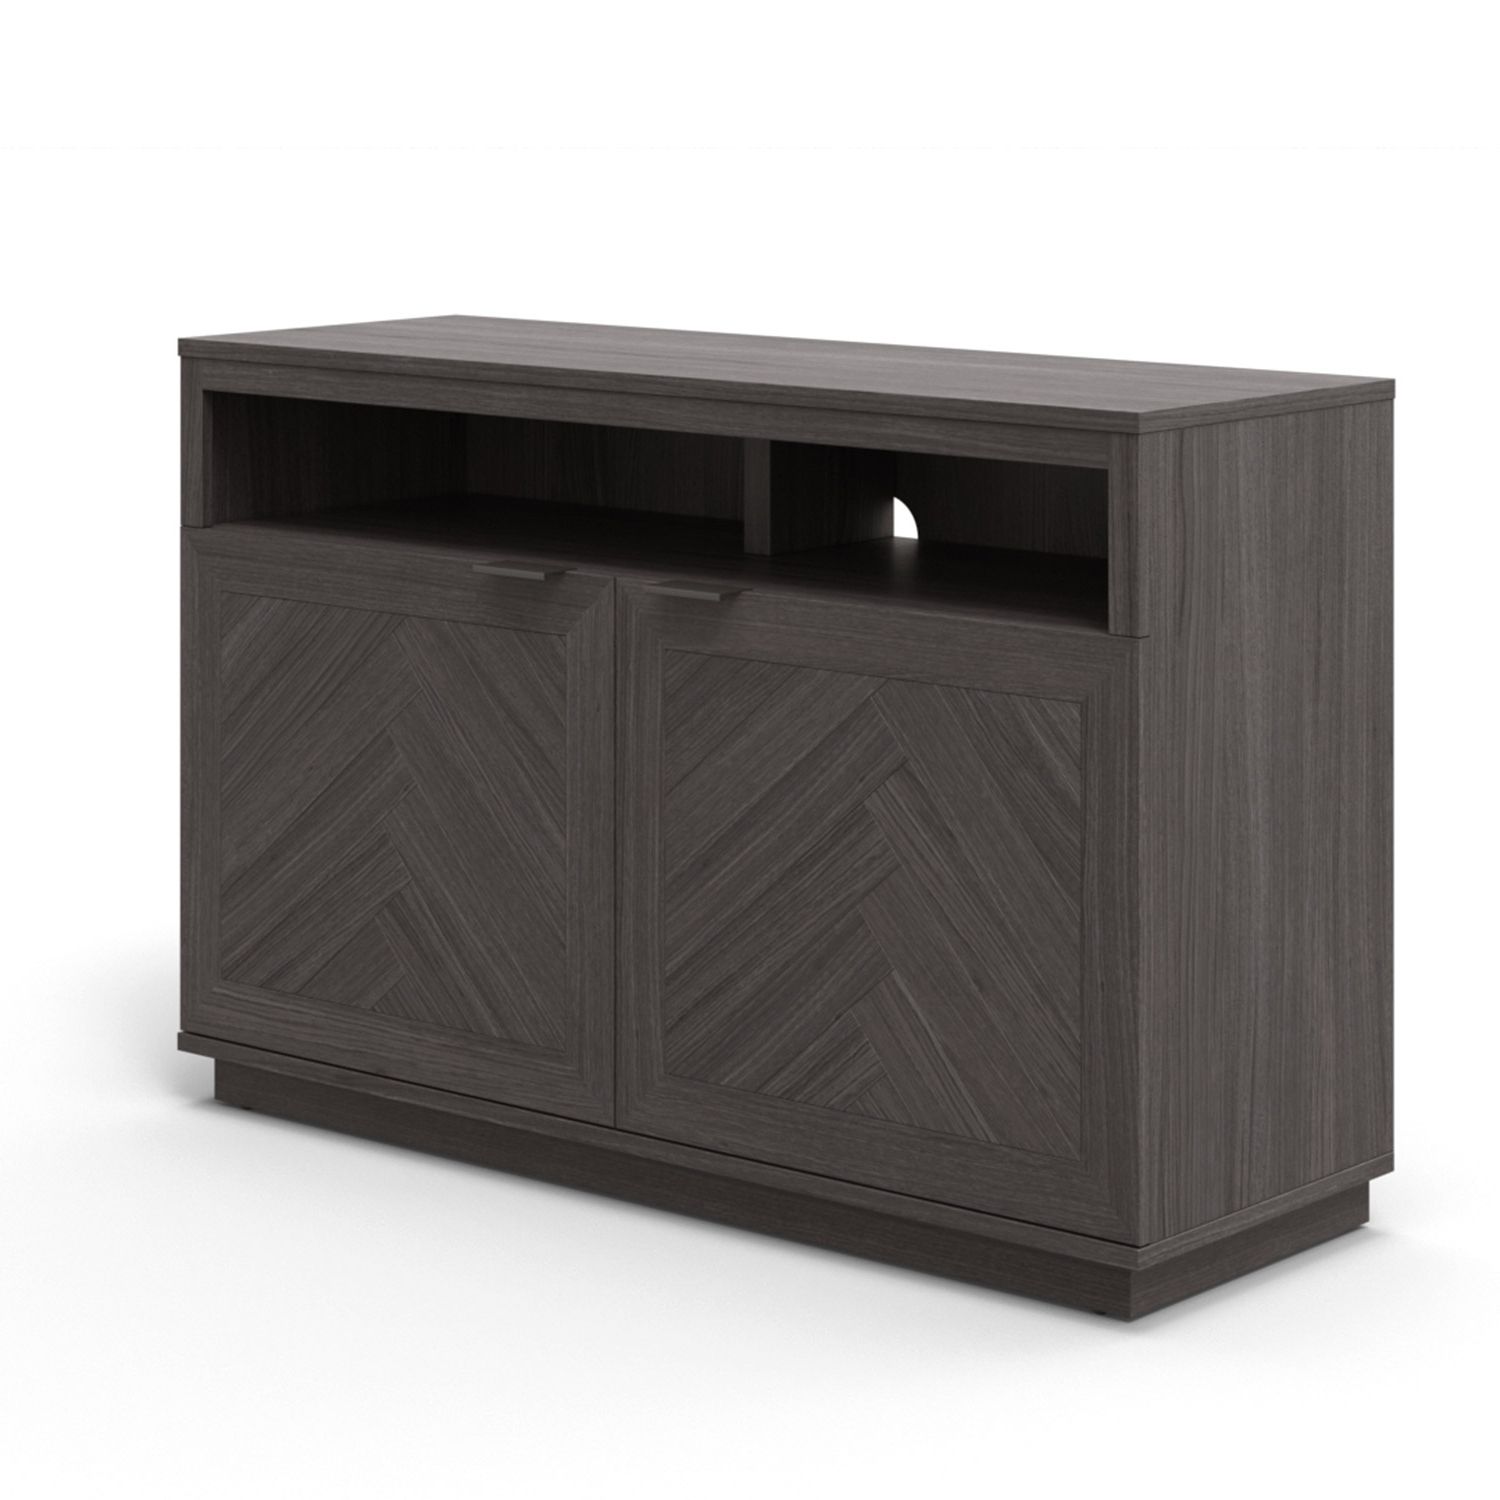 Whalen For Farmhouse Tv Stands For 75" Flat Screen With Console Table Storage Cabinet (Gallery 3 of 20)